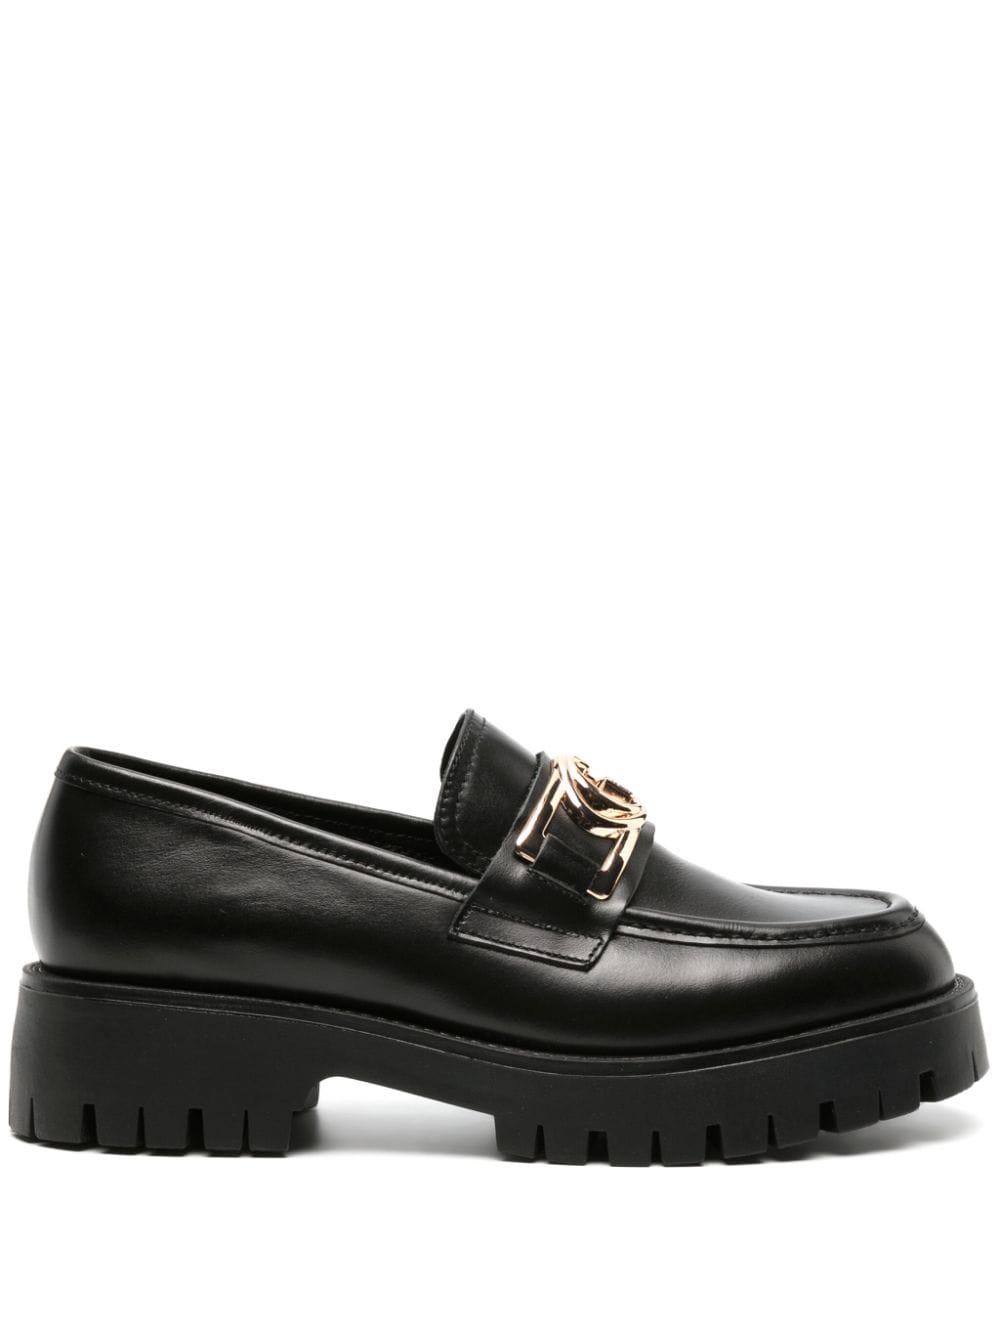 GUESS USA Ilary logo-plaque loafers Black